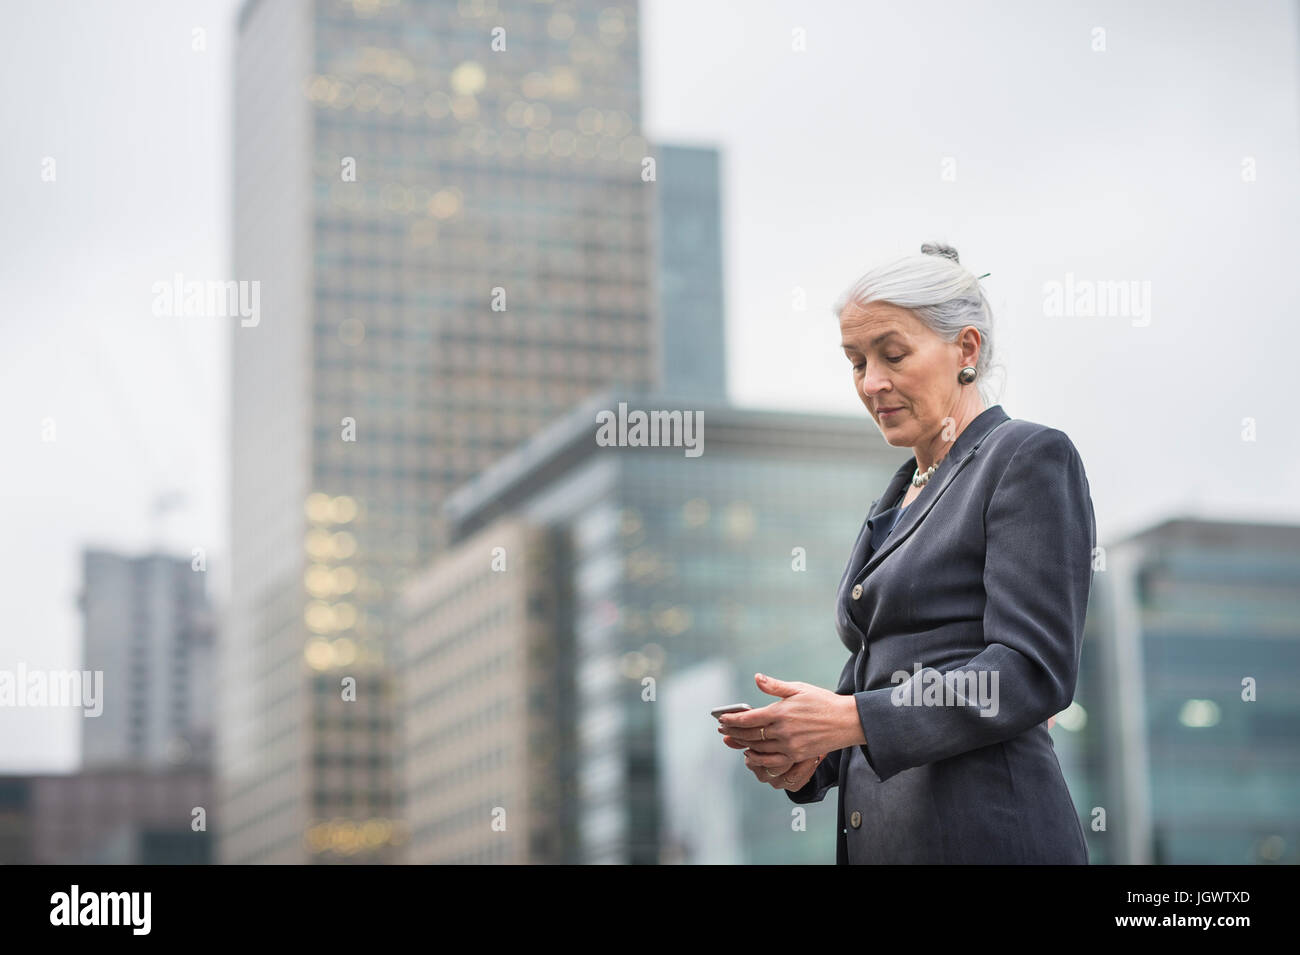 Businesswoman using mobile phone, Canary Wharf, London, UK Banque D'Images